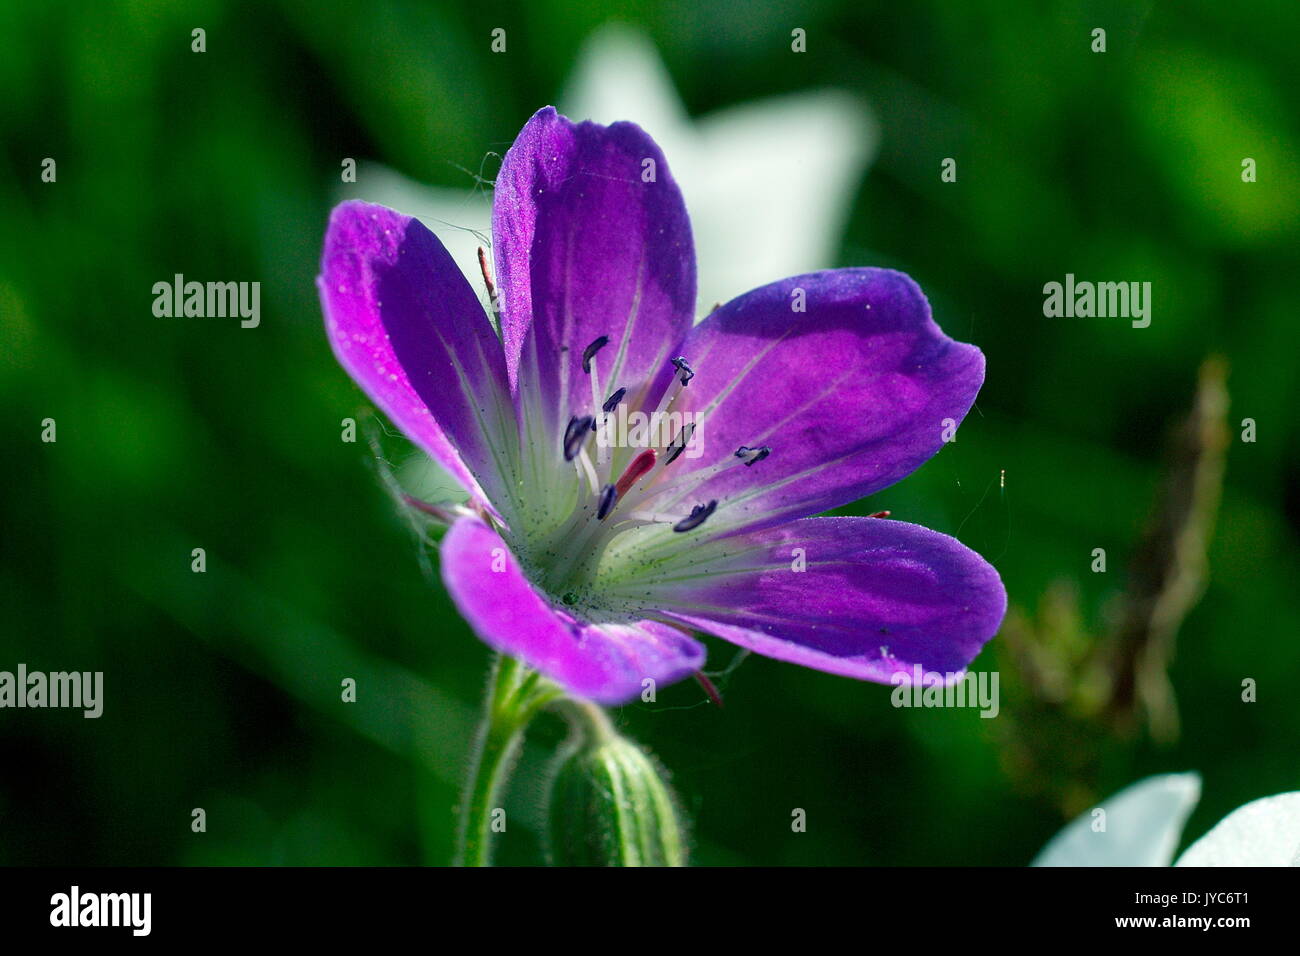 Geranium sylvaticum, wood cranesbill, woodland geranium, is a species of hardy flowering plant in the Geraniaceae family, native to Europe and norther Stock Photo